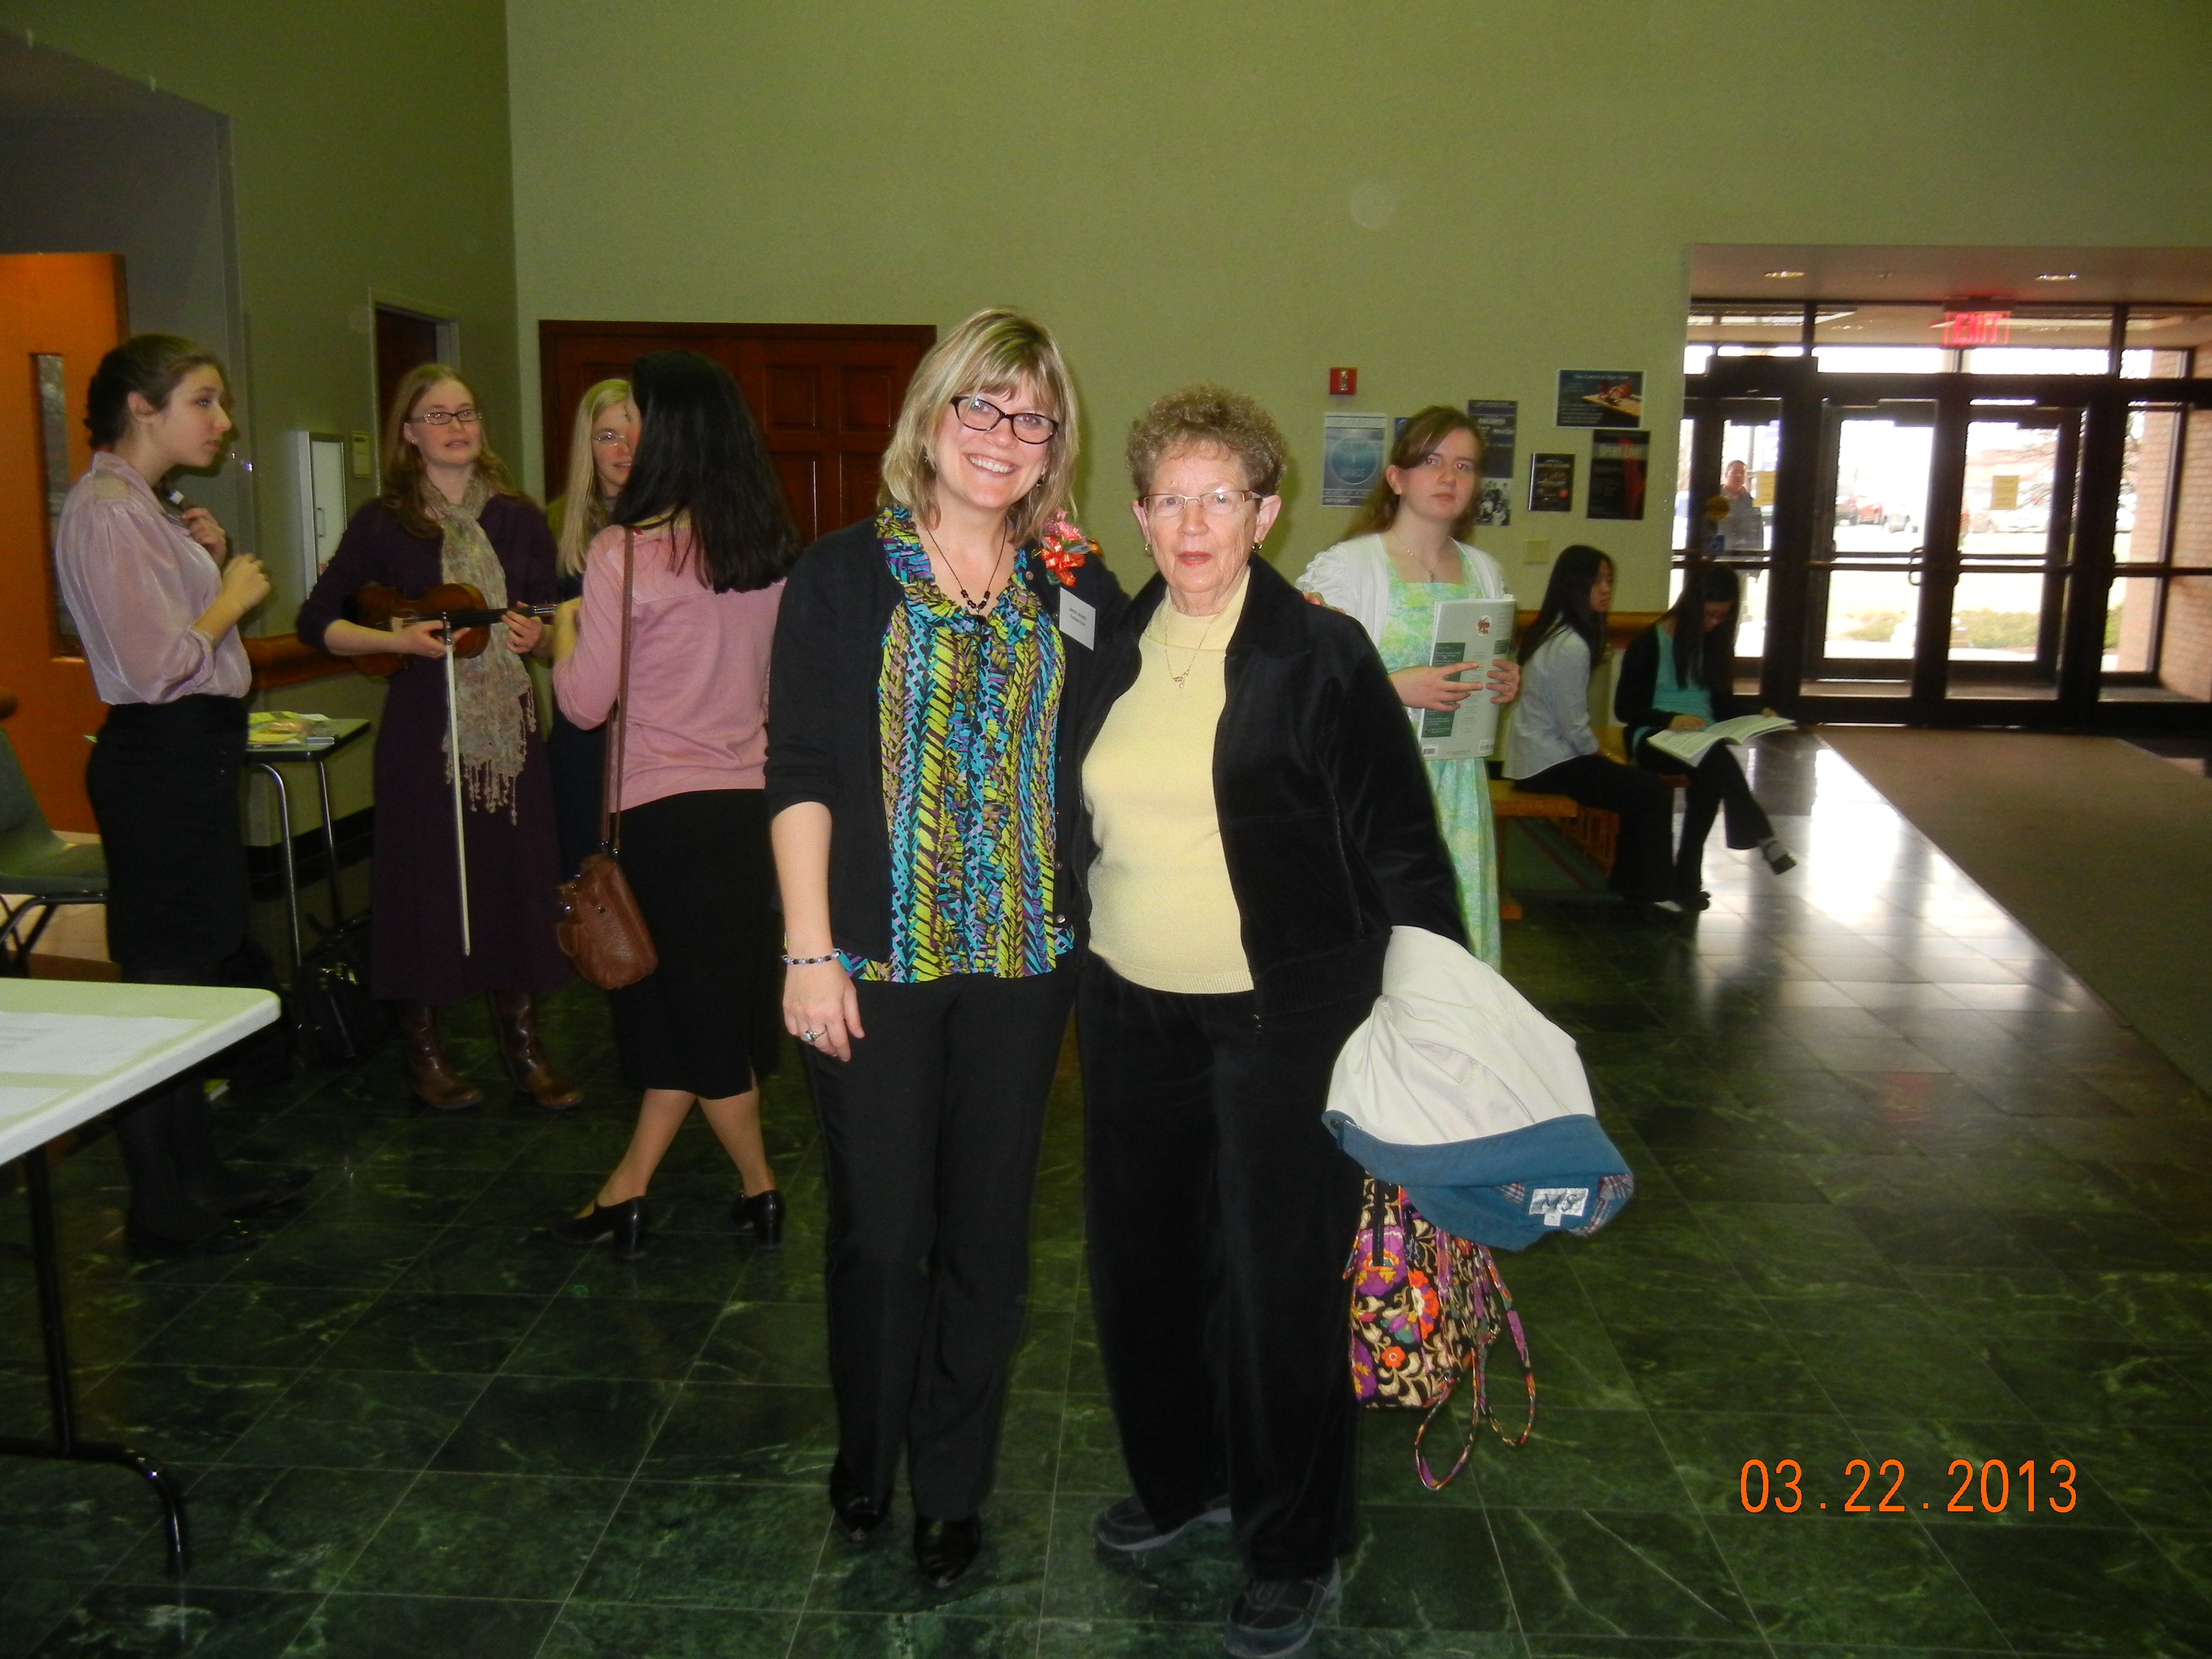 Angie Vaubel, Festival Chairman with OFMC President, Helen Dill